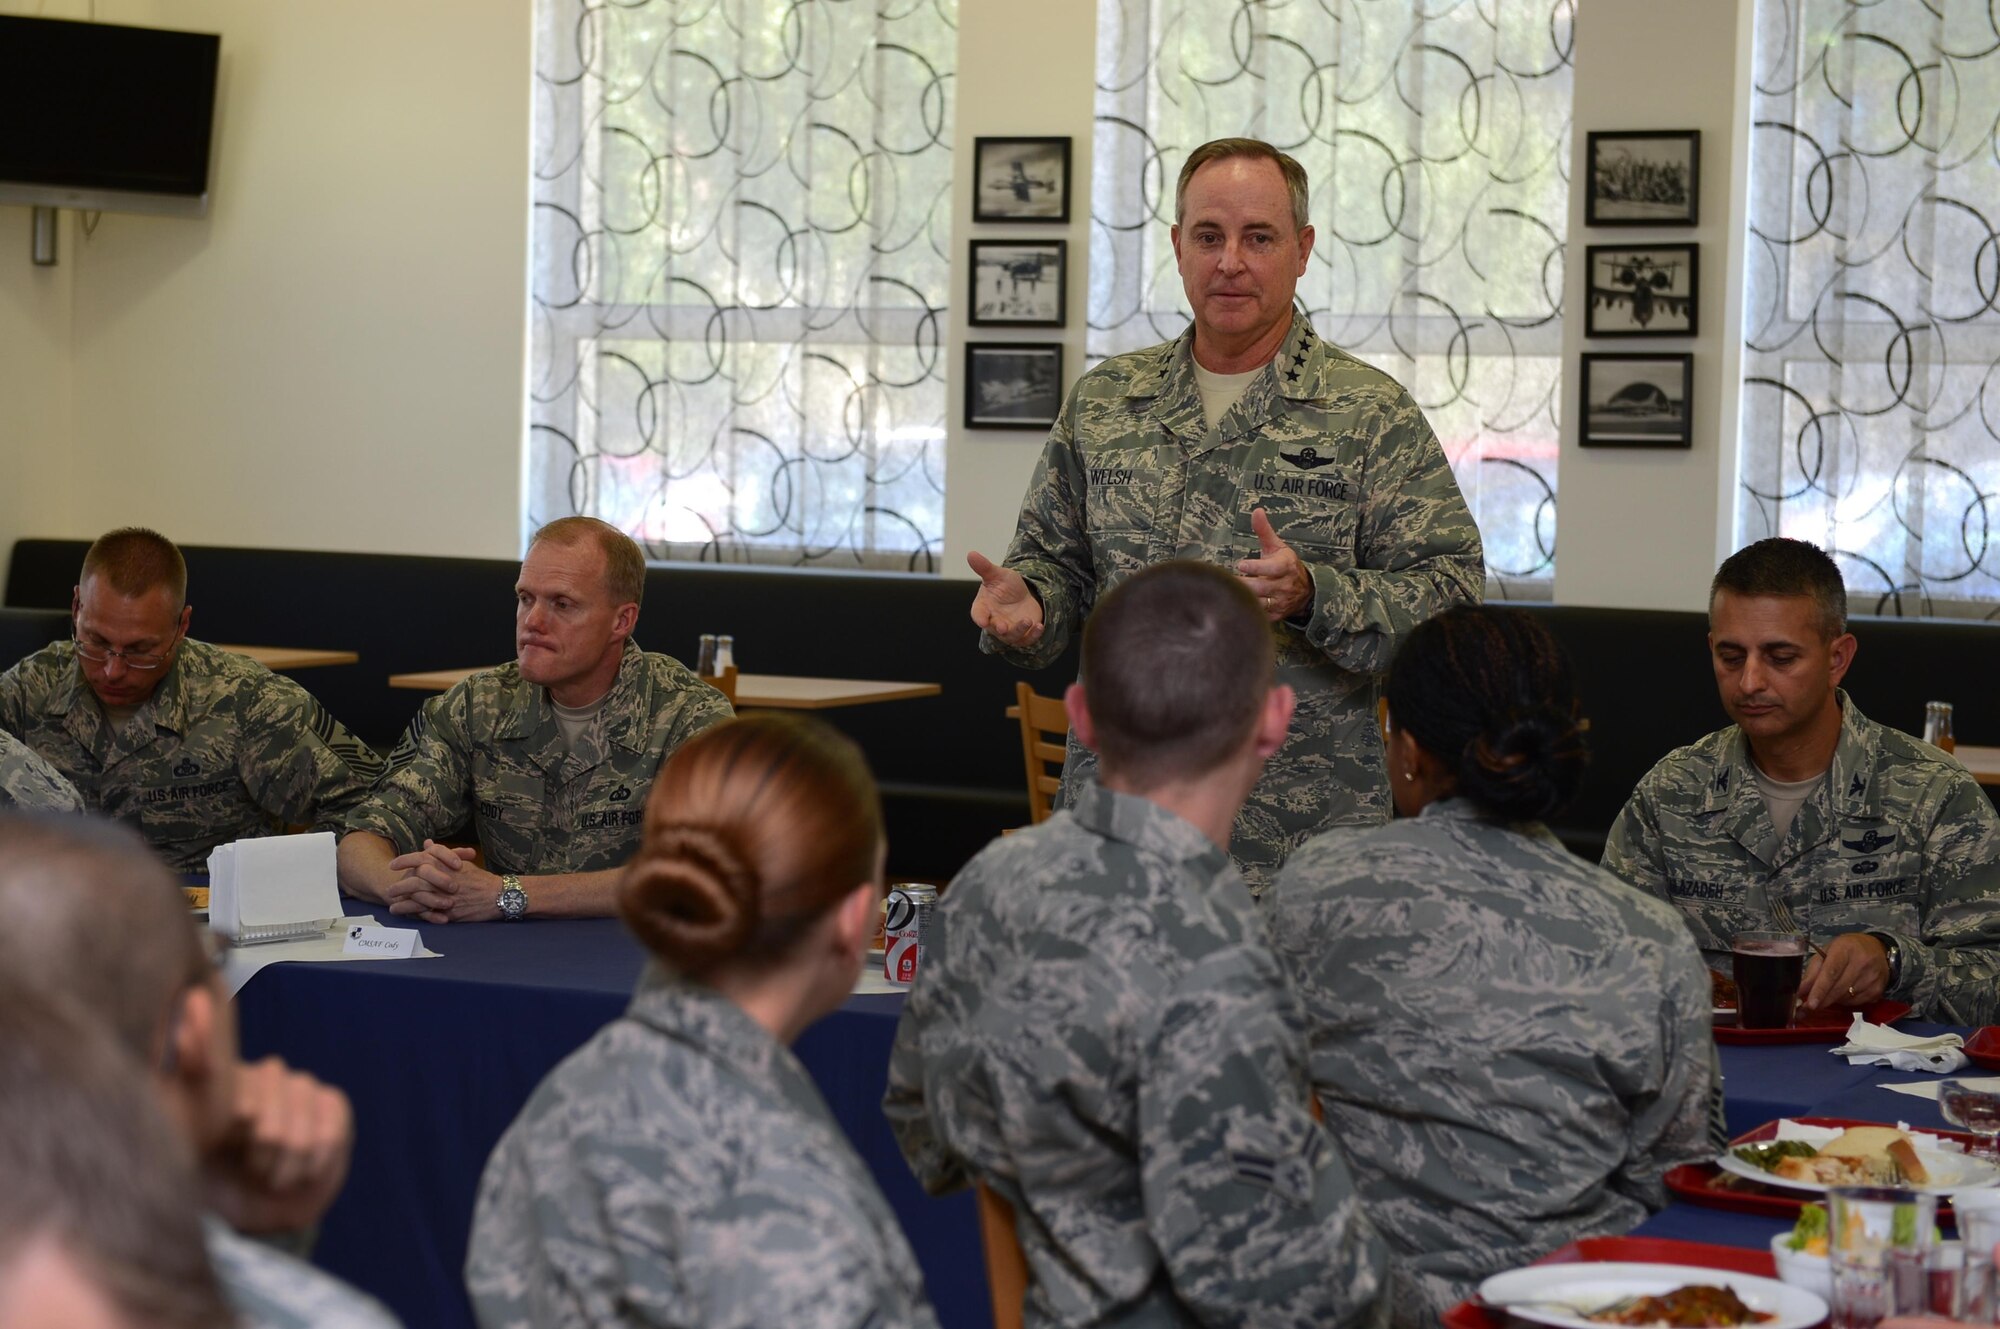 Air Force Chief of Staff Gen. Mark A. Welsh III speaks with Airmen at the Mosel Dining Hall Aug. 1, 2013. Welsh and Chief Master Sgt. of the Air Force James Cody answered questions from Spangdahlem Airmen about how the Air Force is evolving in today’s world. 